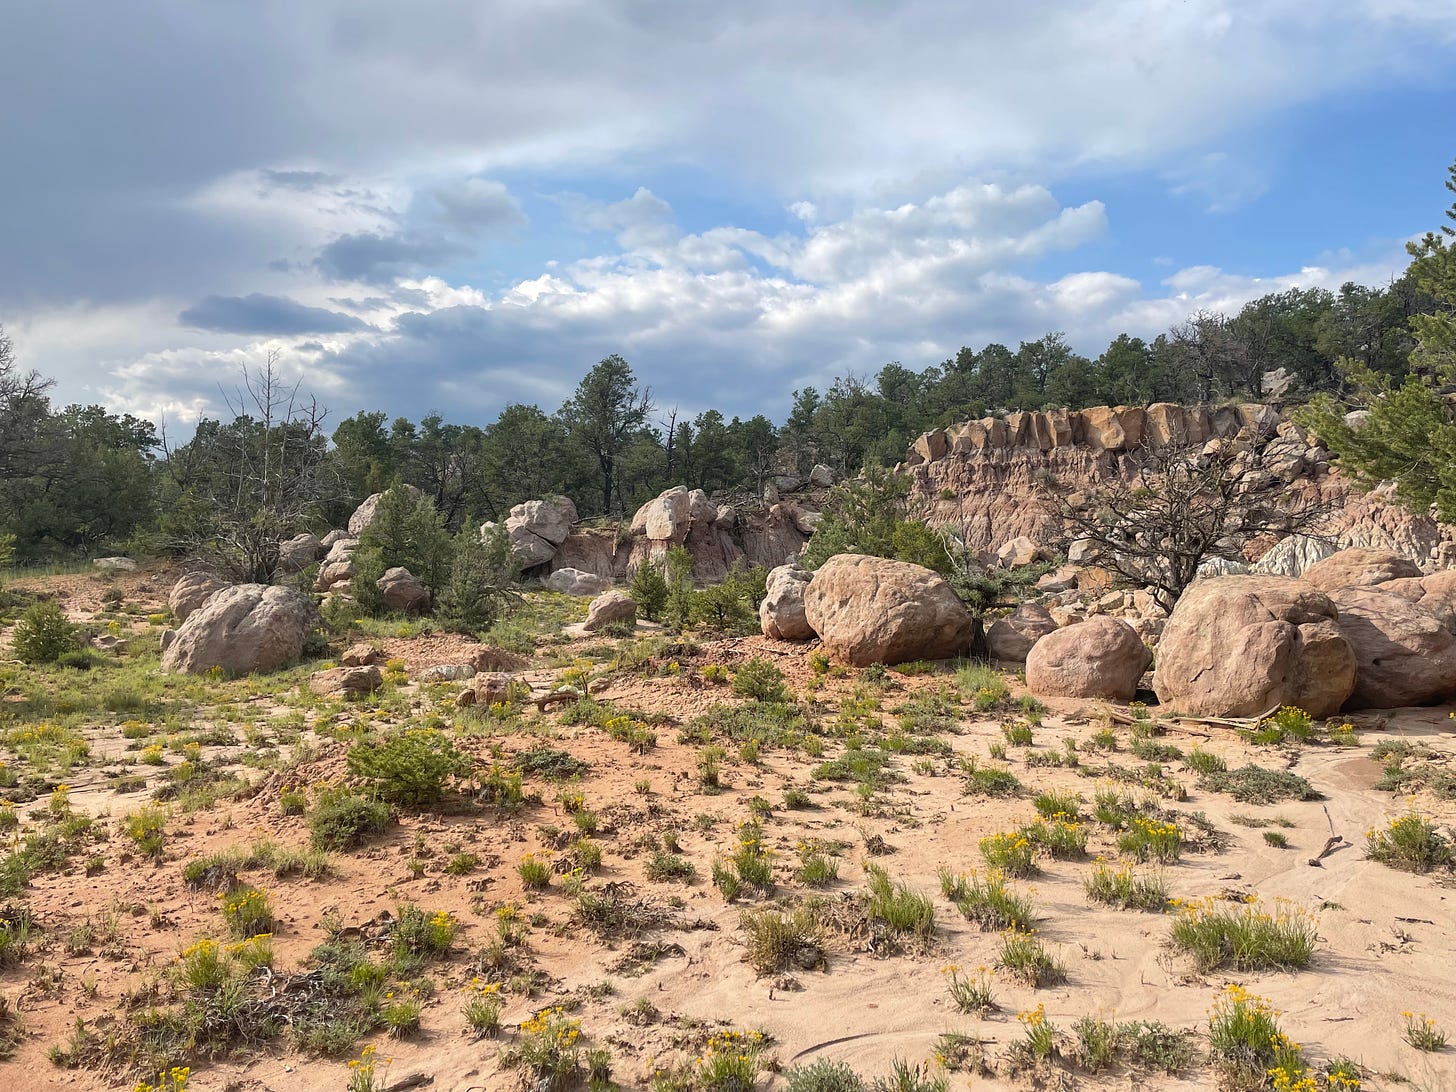 A partly cloudy sky over piles of striated rocks and pine trees interspersed.